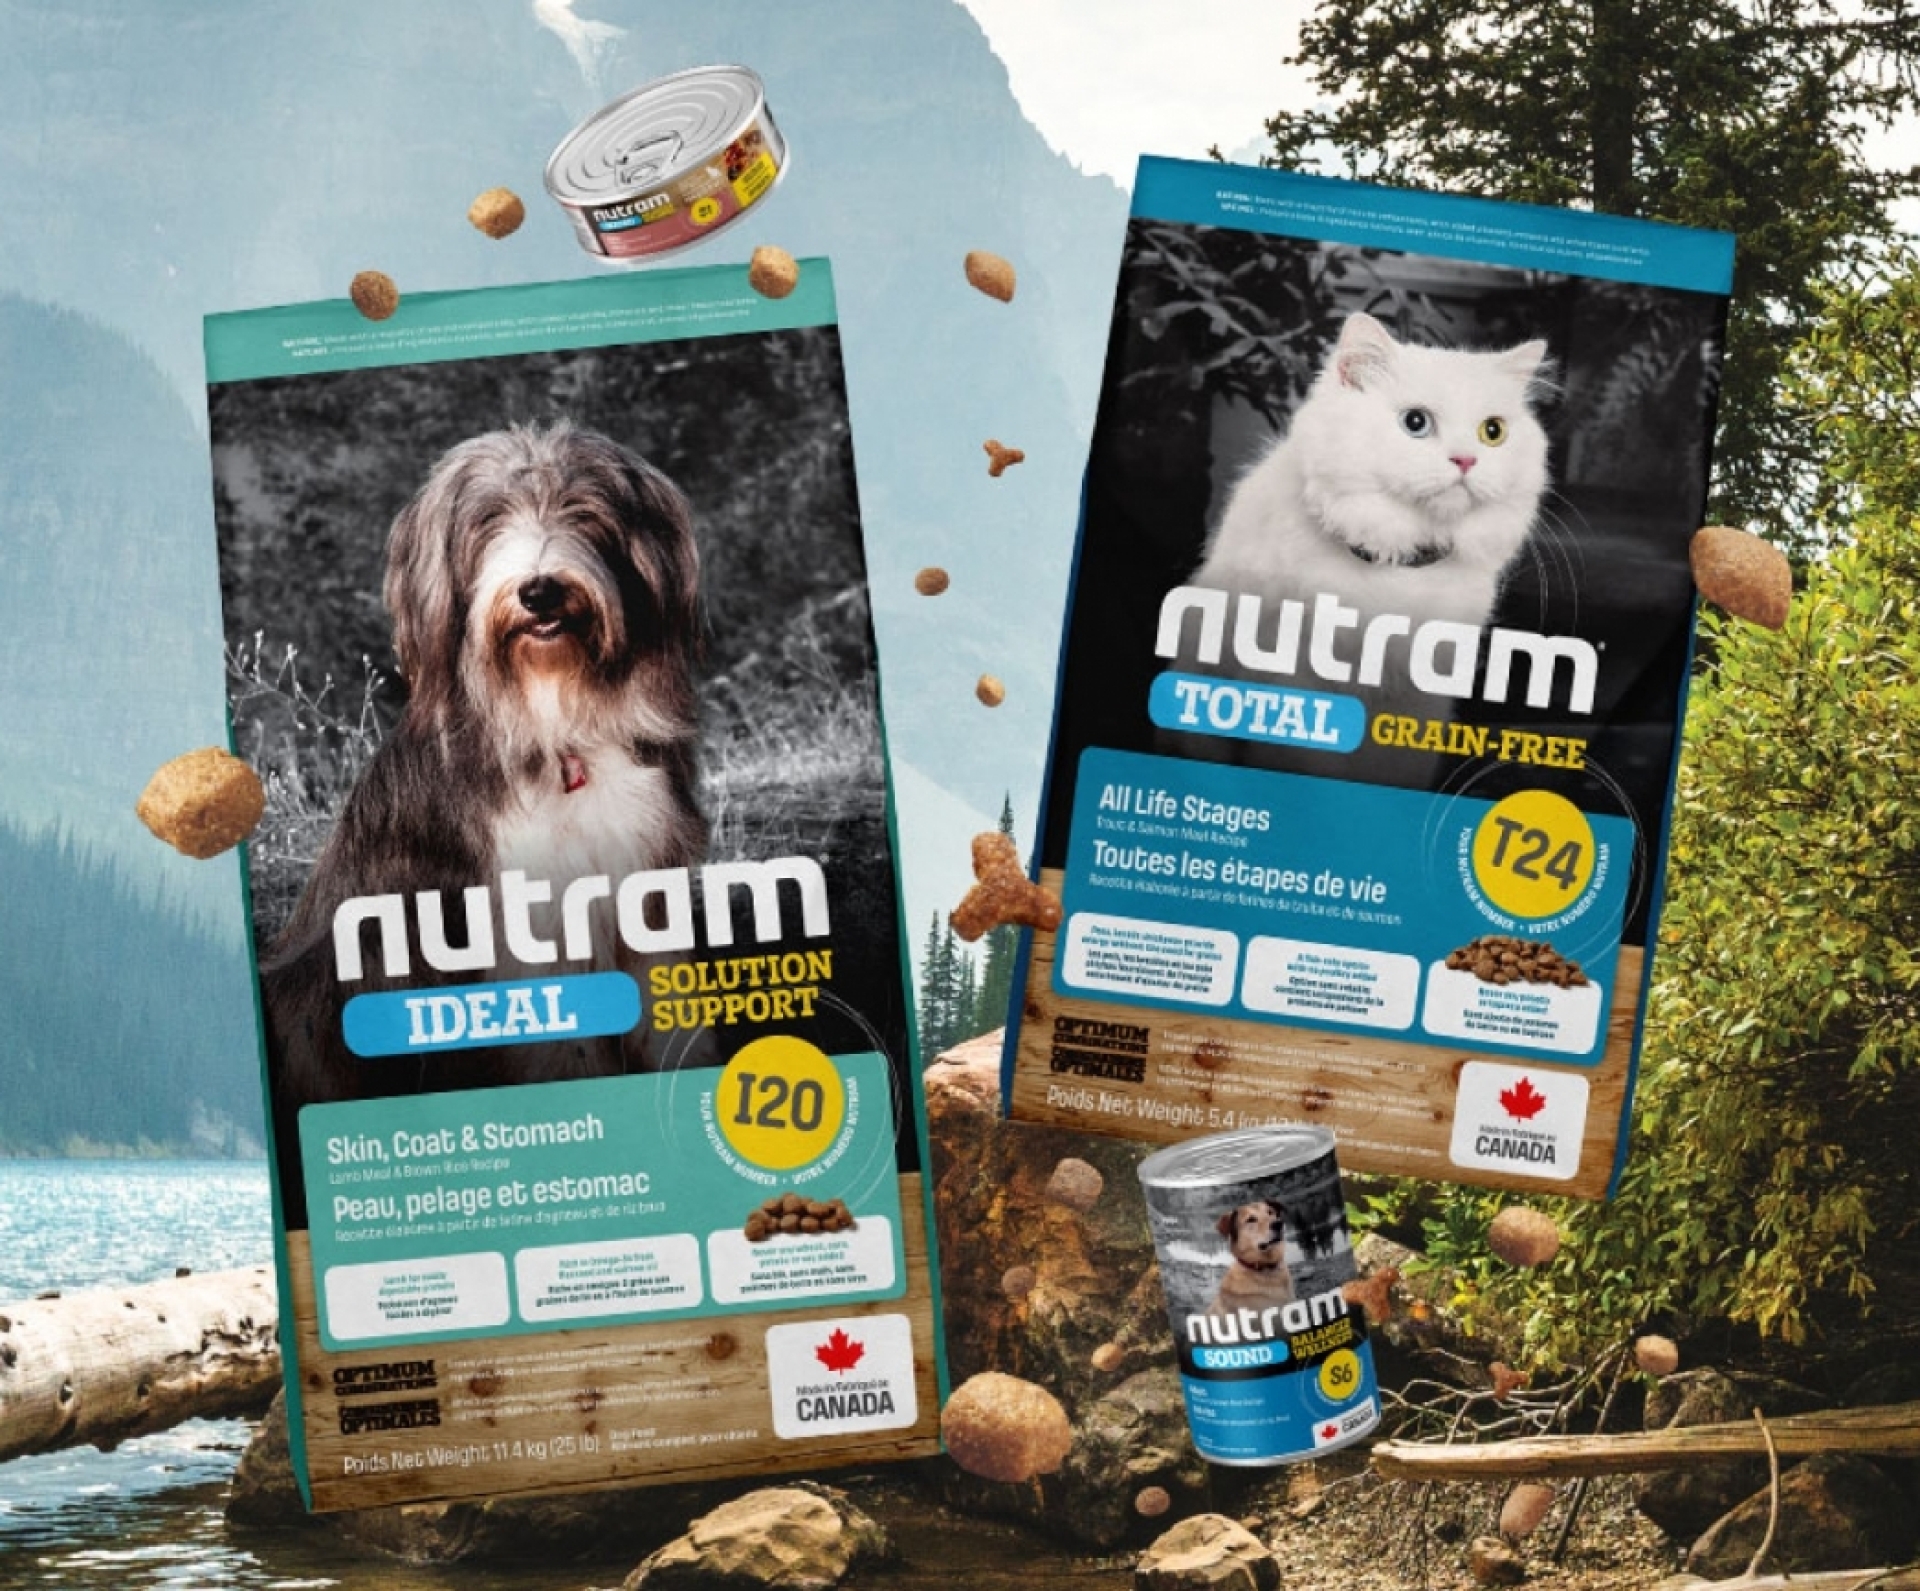 Nutram product packaging design on a nature background